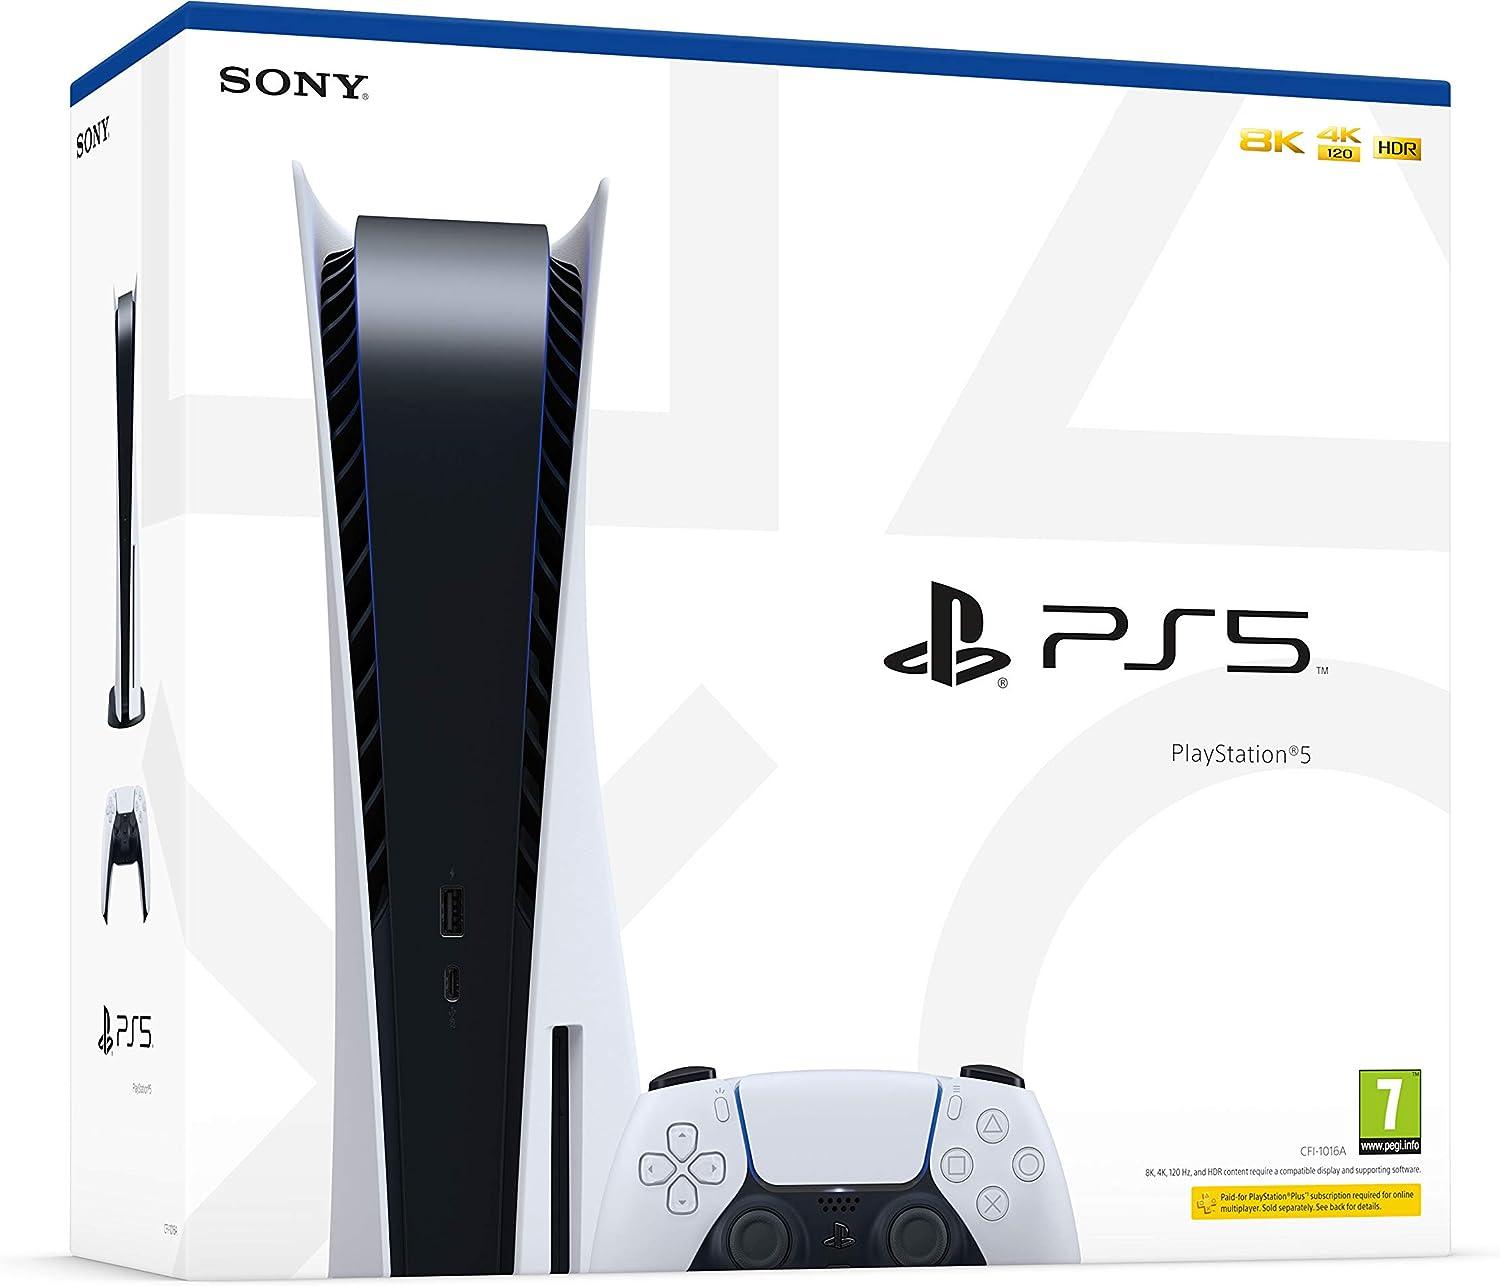 Sony PlayStation 5 Disk Console - Want a New Gadget